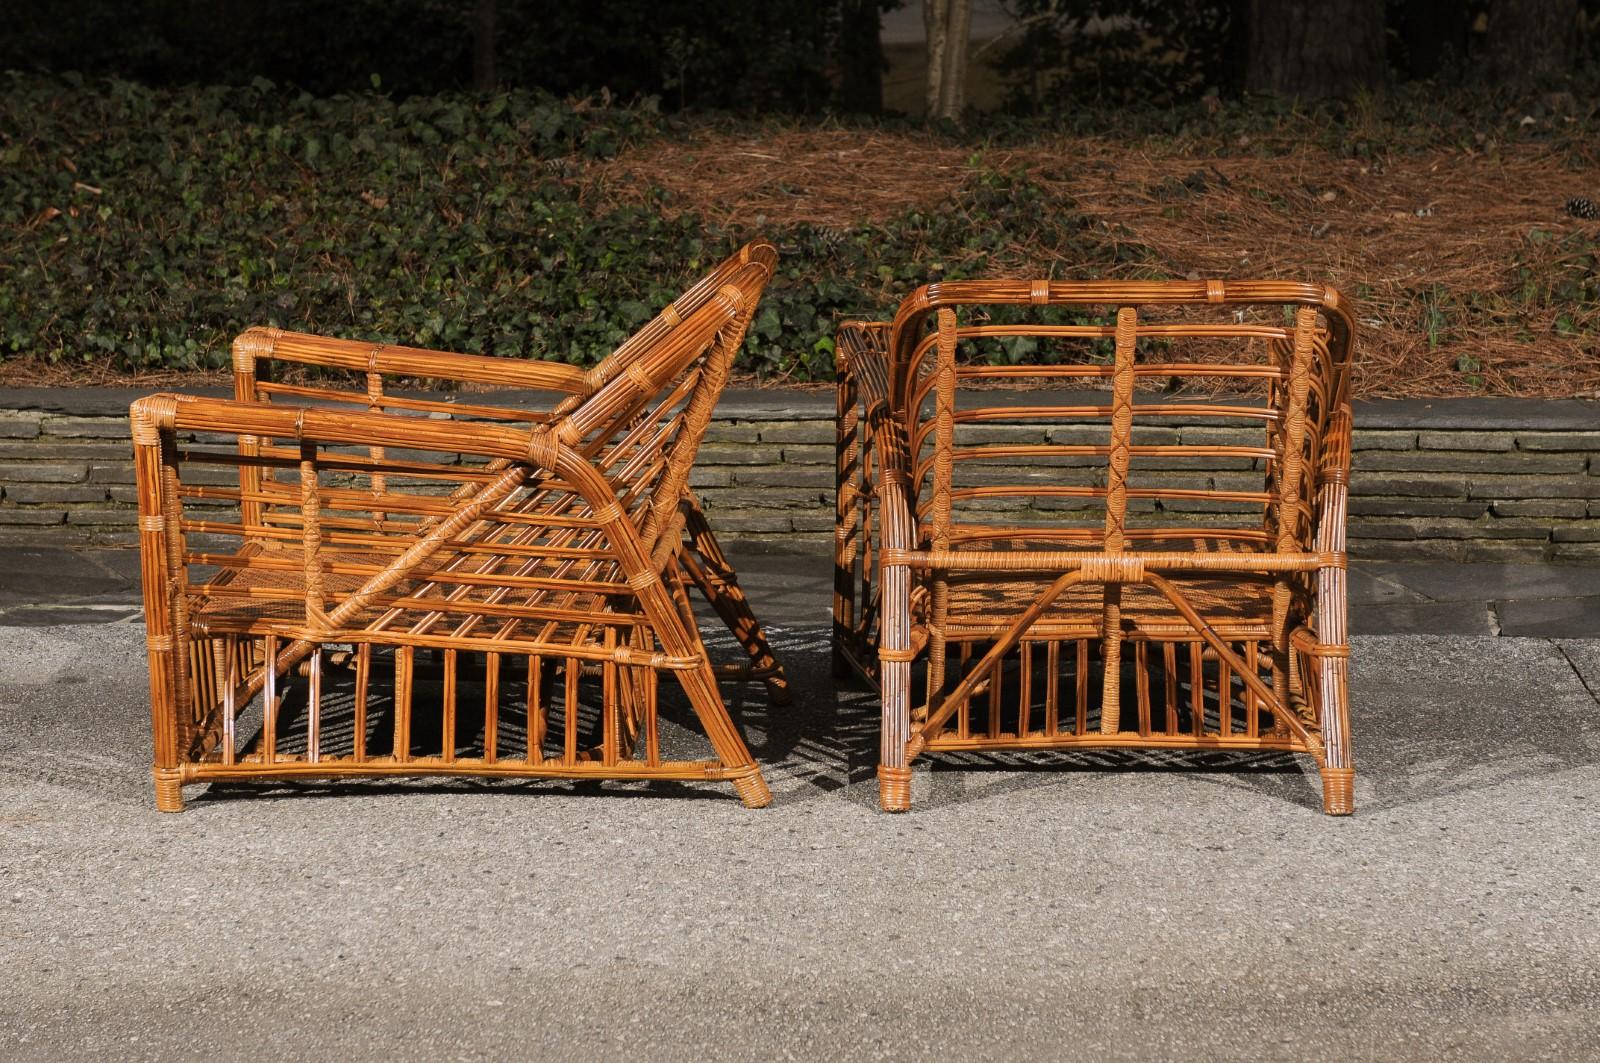 Exquisite Restored Pair of Modern President's Loungers by McGuire, circa 1985 For Sale 5